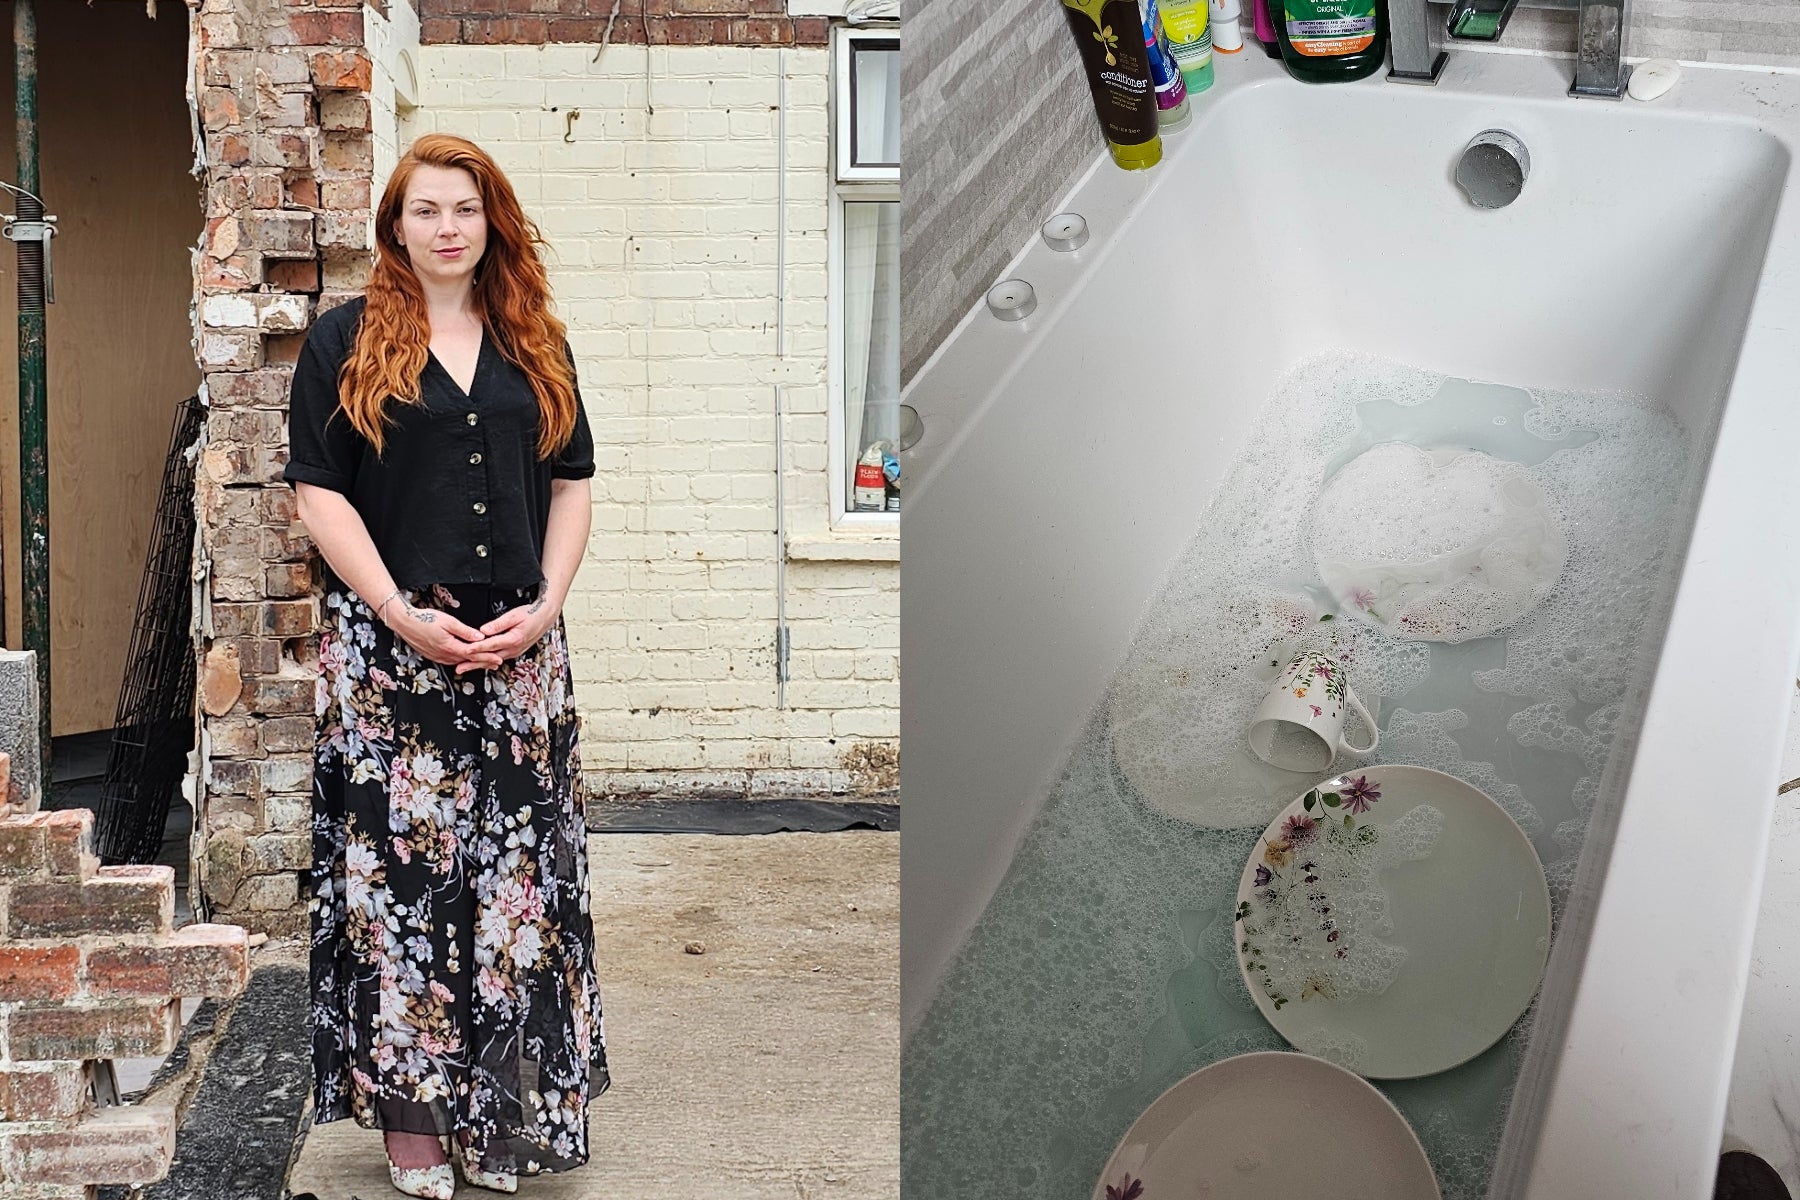 Ionie Smallwood, 33, has spent months living in a house where she cannot cook and is forced to wash dishes in the bath (Collect/PA Real Life)